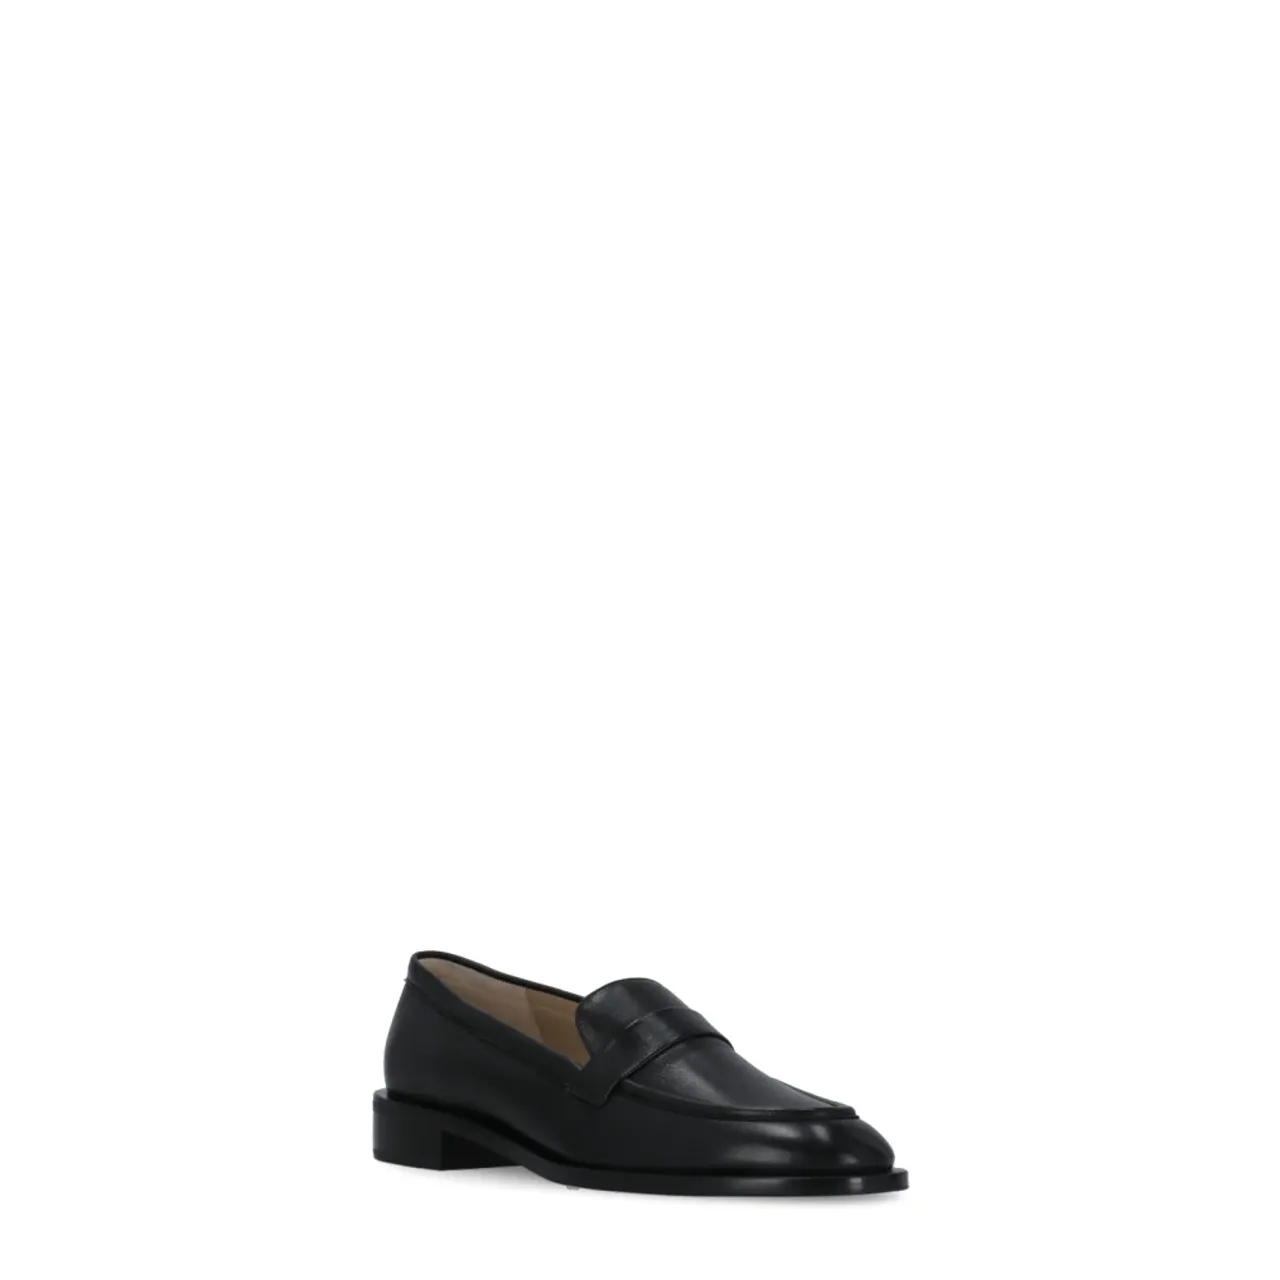 Stuart Weitzman , Black Leather Loafers with Raised Rubber Sole ,Black female, Sizes: